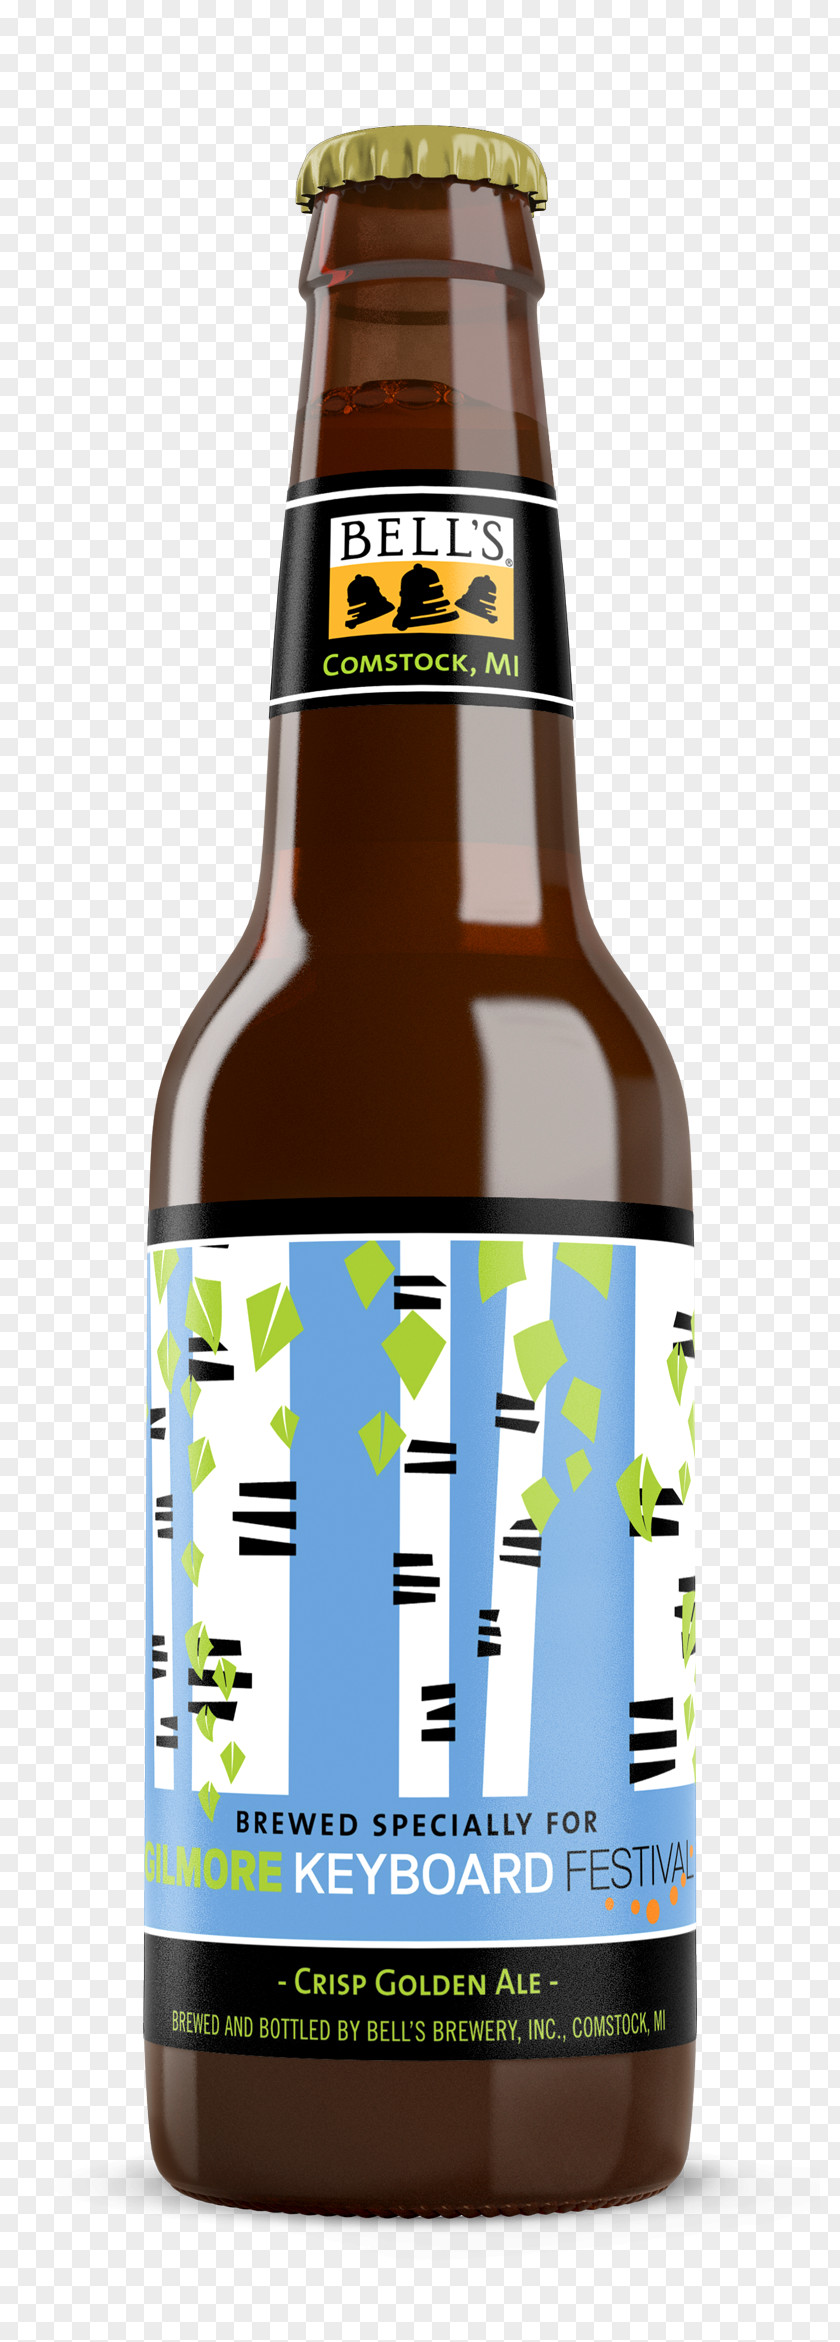 Beer Ale Bell's Brewery Bottle Lager PNG